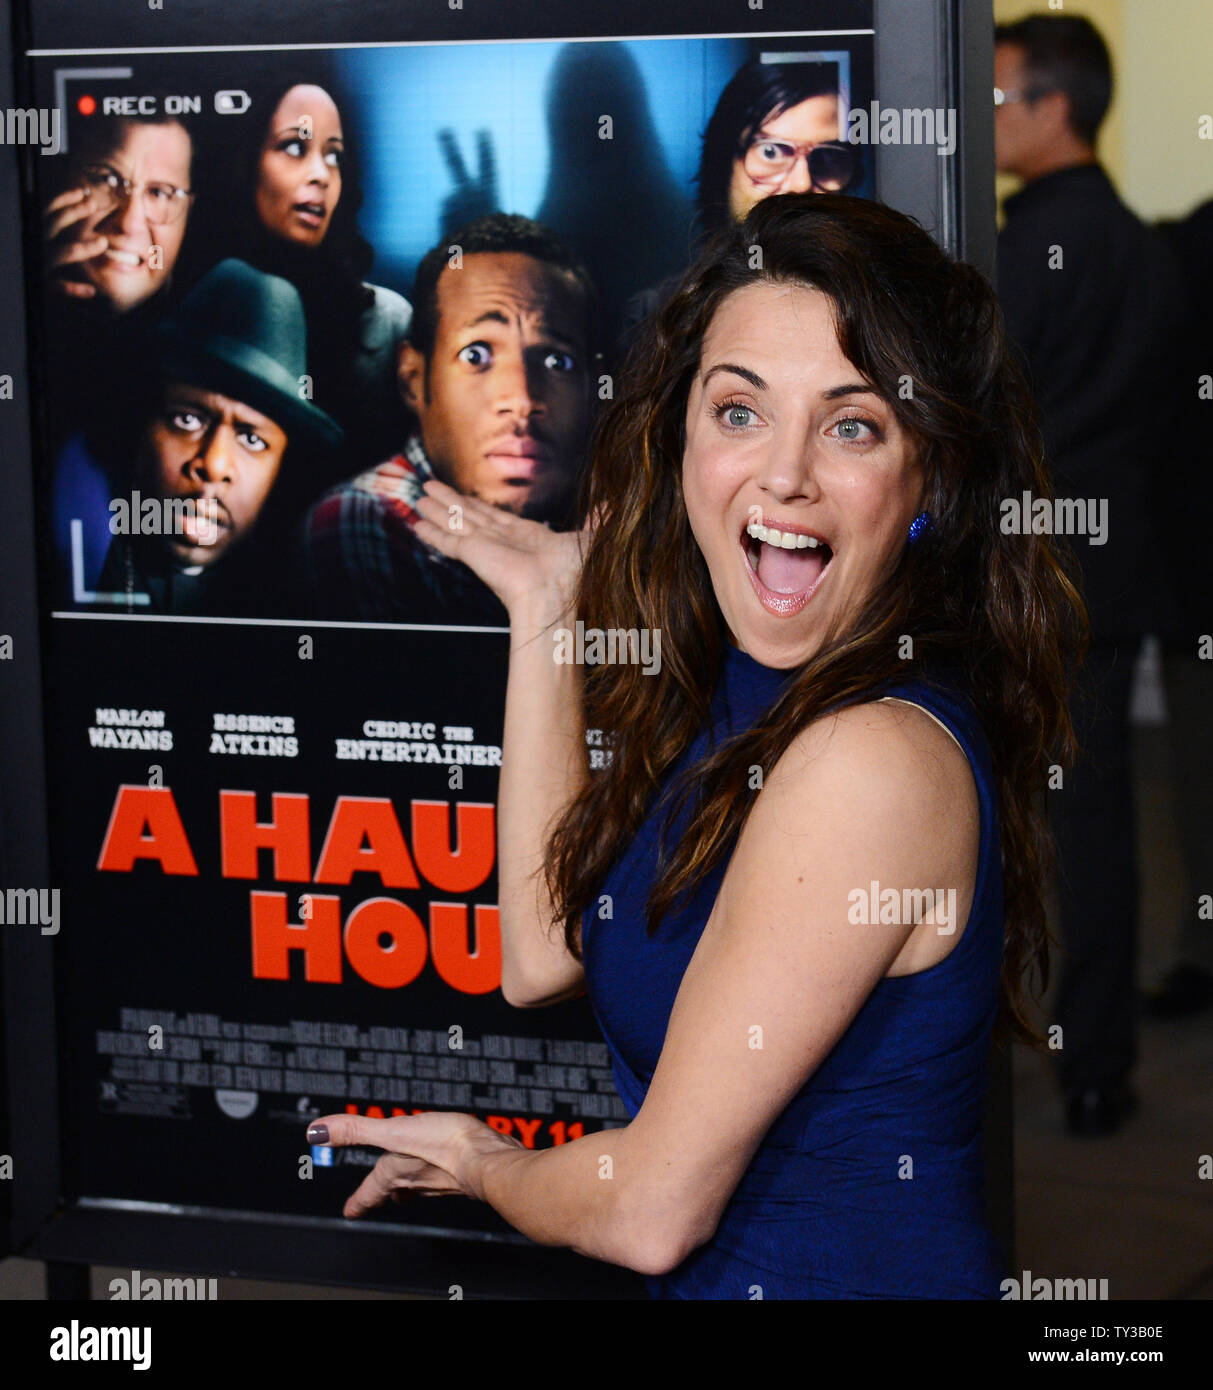 Alanna Ubach, a cast member in the motion picture comedy 'A Haunted House', attends the premiere of the film at the Arclight Cinerama Dome in the Hollywood section of Los Angeles on January 3, 2013.  UPI/Jim Ruymen Stock Photo